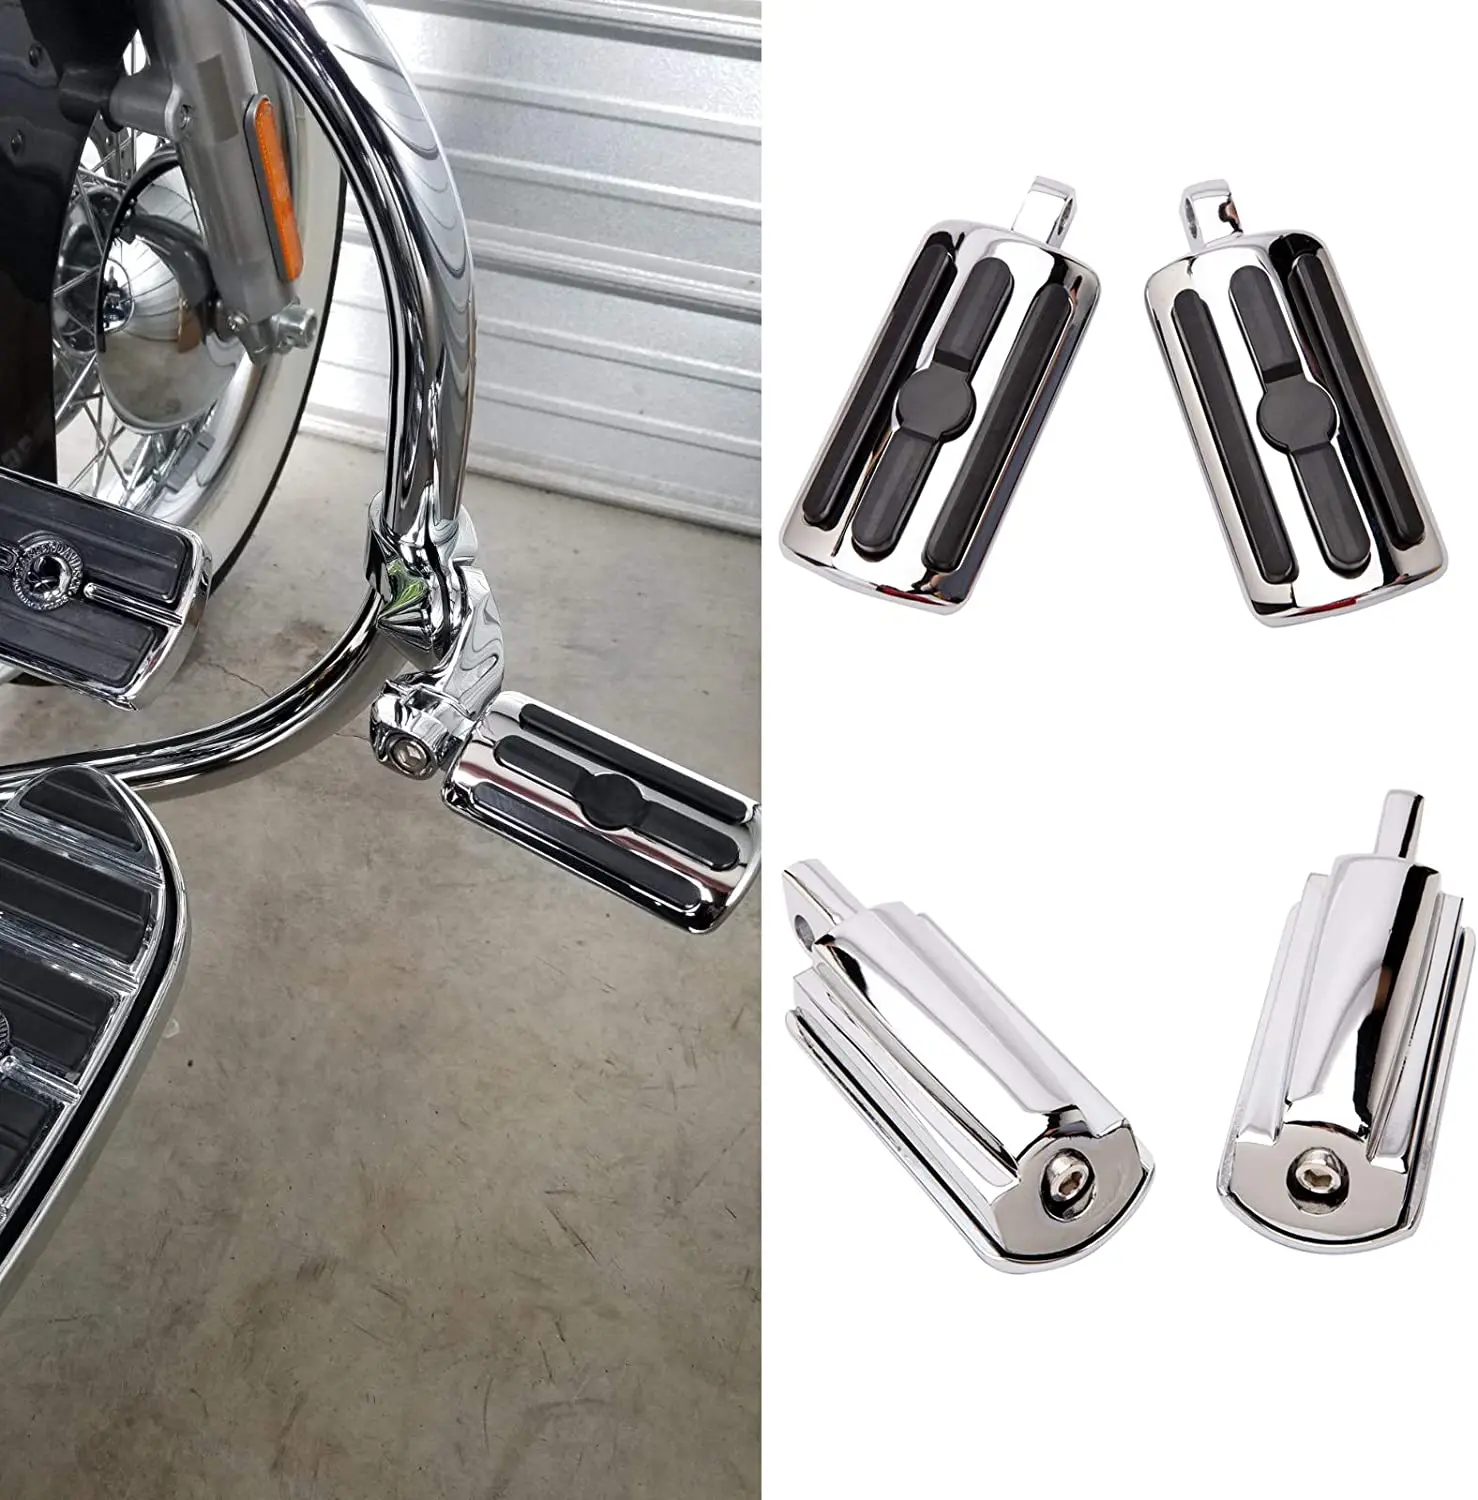 

LAICY Universal 10mm Motorcycle Highway Foot Pegs Rests For Harley Davidson Electra Street Glide Road King Custom Sportster